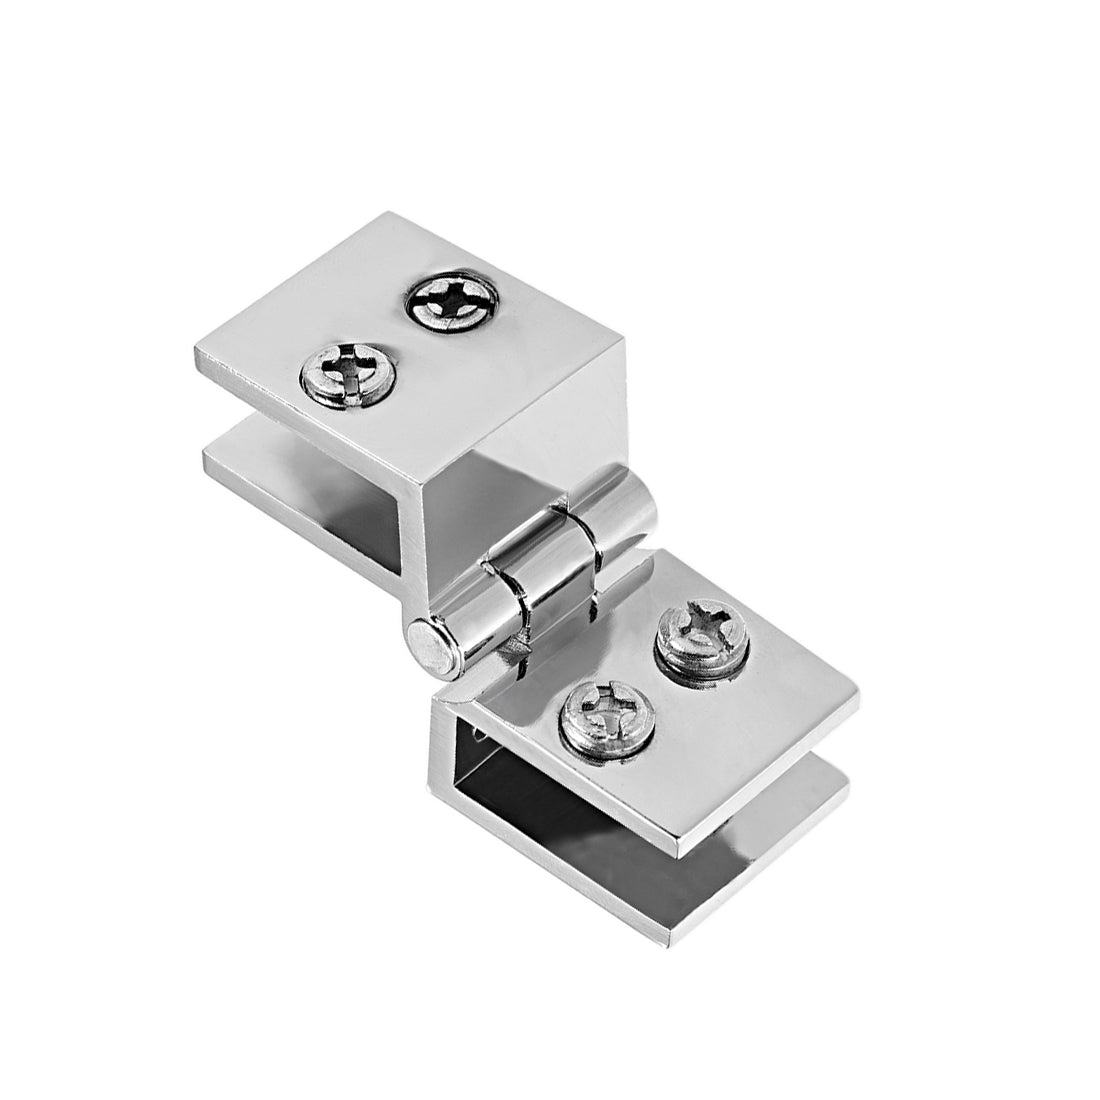 uxcell Uxcell Glass Door Hinge - 90 Degree Cupboard Showcase Cabinet Door Hinge Glass Clamp ,Zinc Alloy , for 5-8mm Glass Thickness 4Pcs